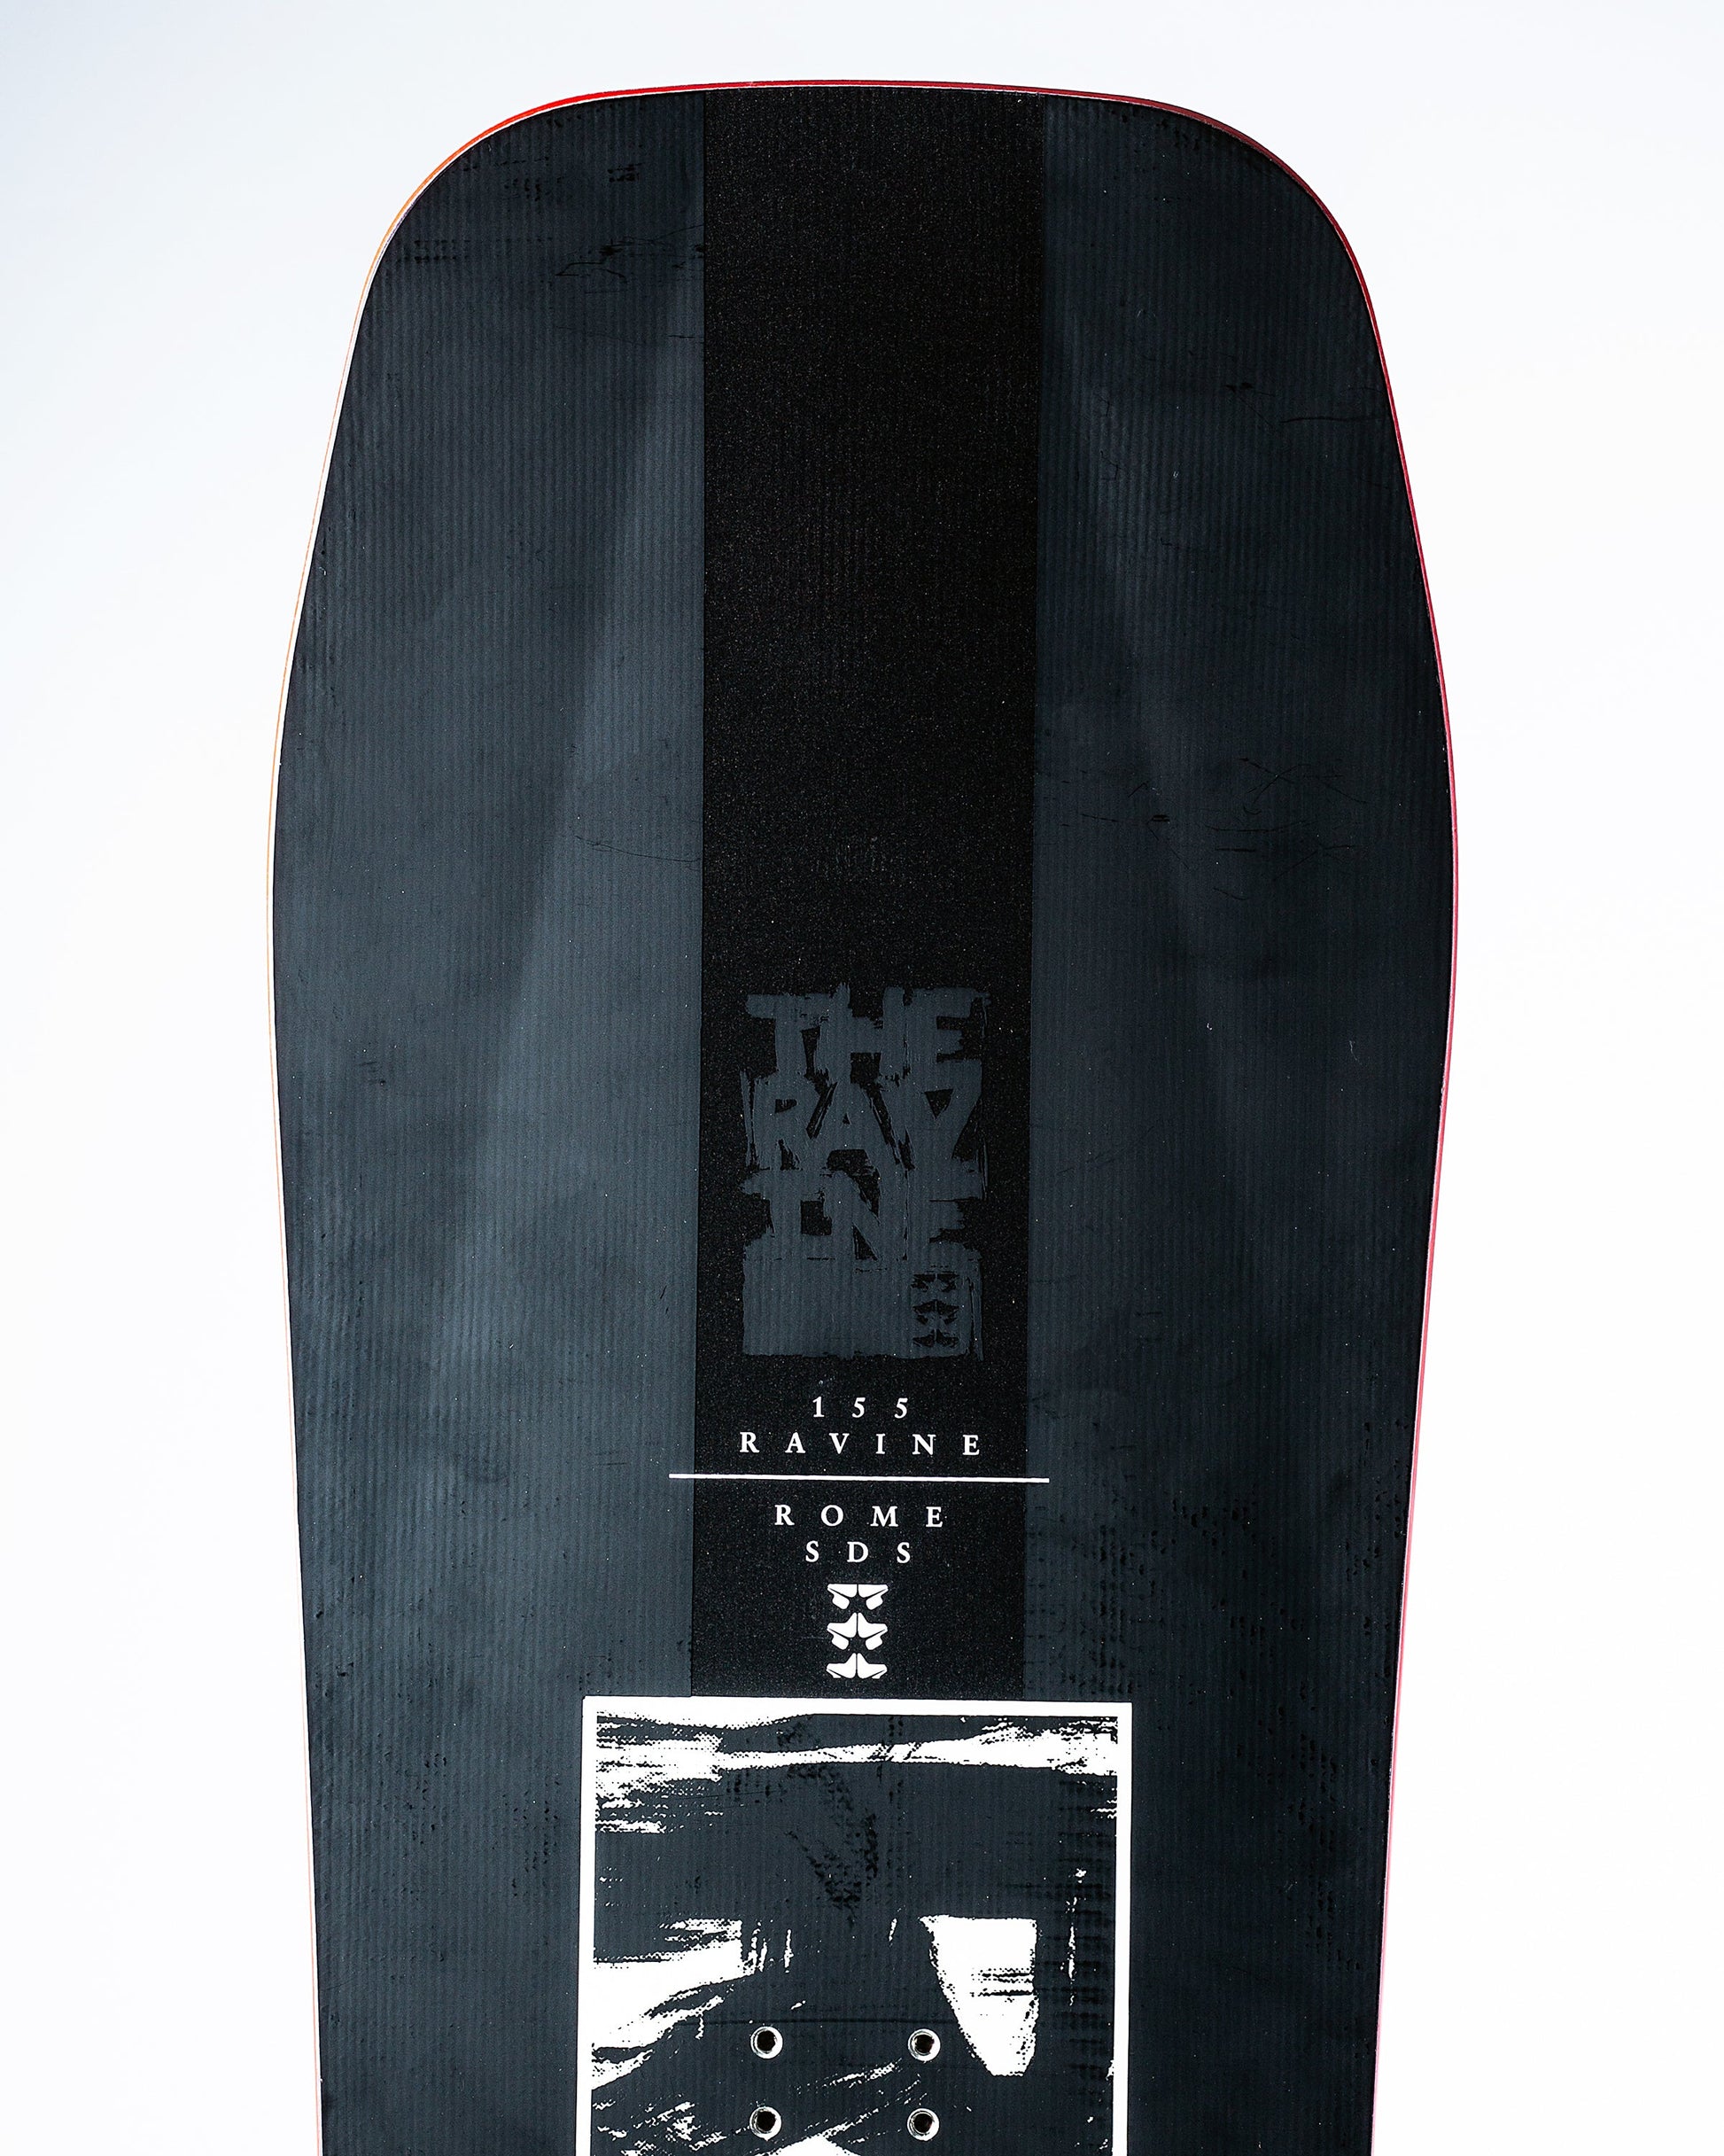 rome sds ravine 2023 directional snowboard product photo close up nose shot in studio